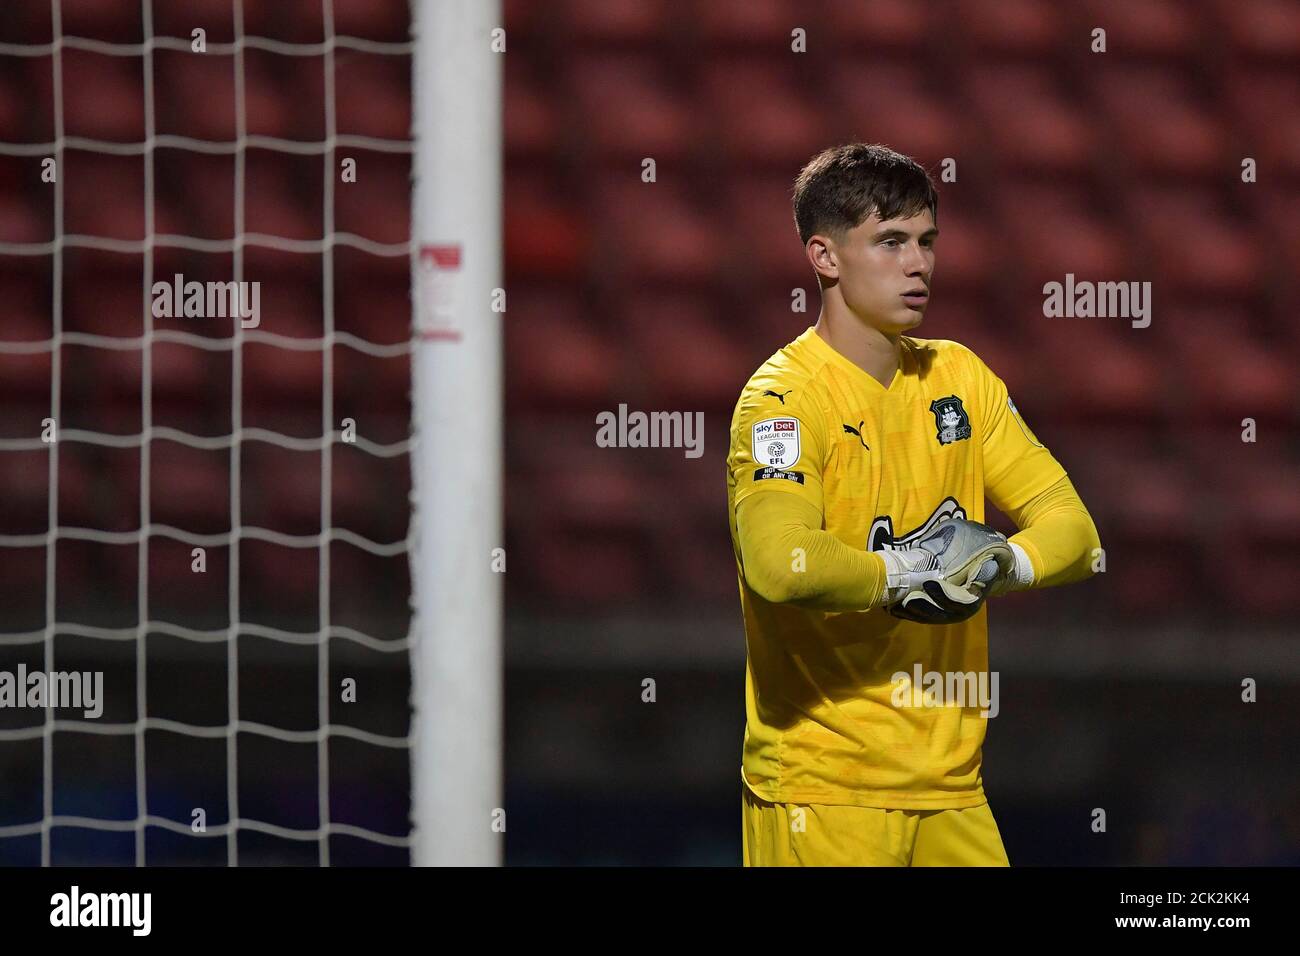 London, UK. 15th Sep, 2020. Michael Cooper of Plymouth Argyle during the Carabao Cup second round match between Leyton Orient and Plymouth Argyle at the Matchroom Stadium, London, England on 15 September 2020. Photo by Vince Mignott/PRiME Media Images. Credit: PRiME Media Images/Alamy Live News Stock Photo